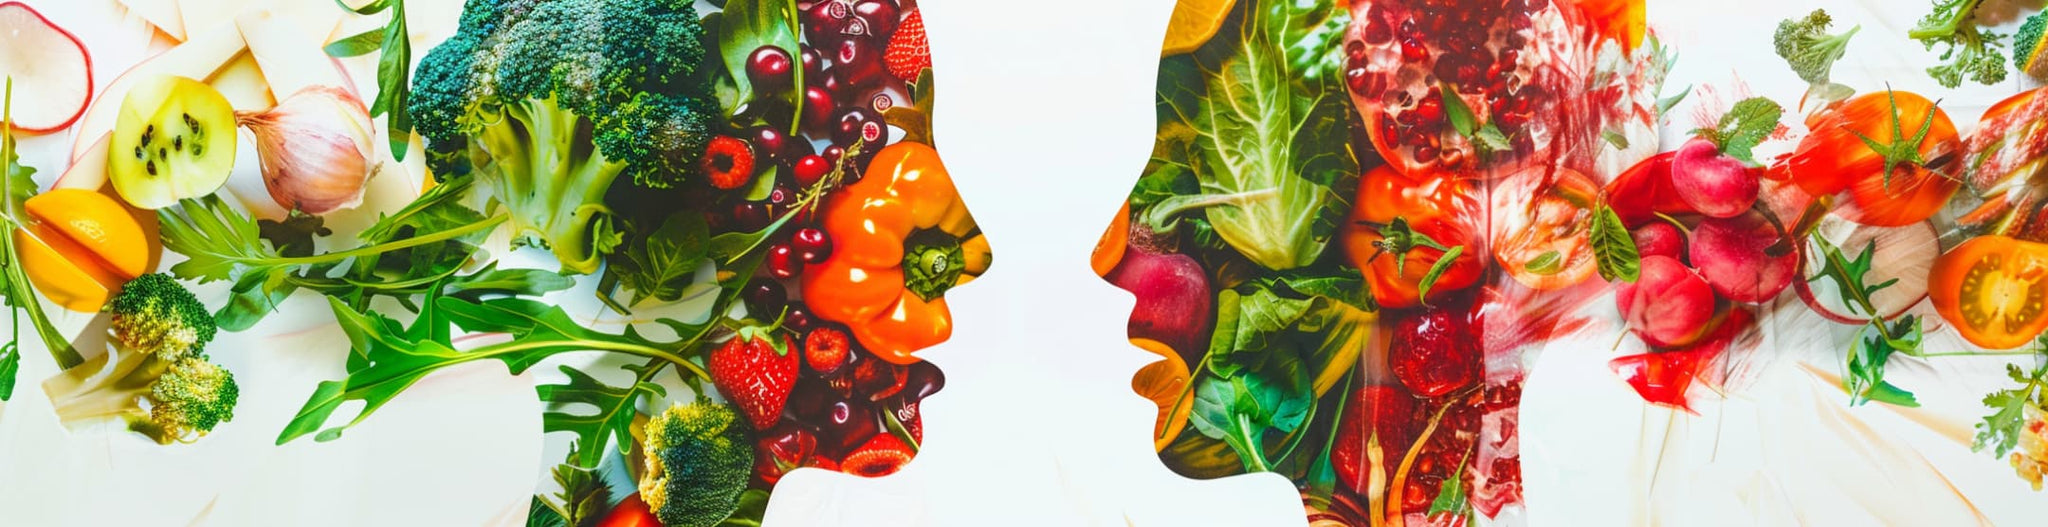 "Listen to your body; it speaks wisdom" - Your body has a way of telling you what it needs. Learning to listen to it can guide you towards healthier eating habits.